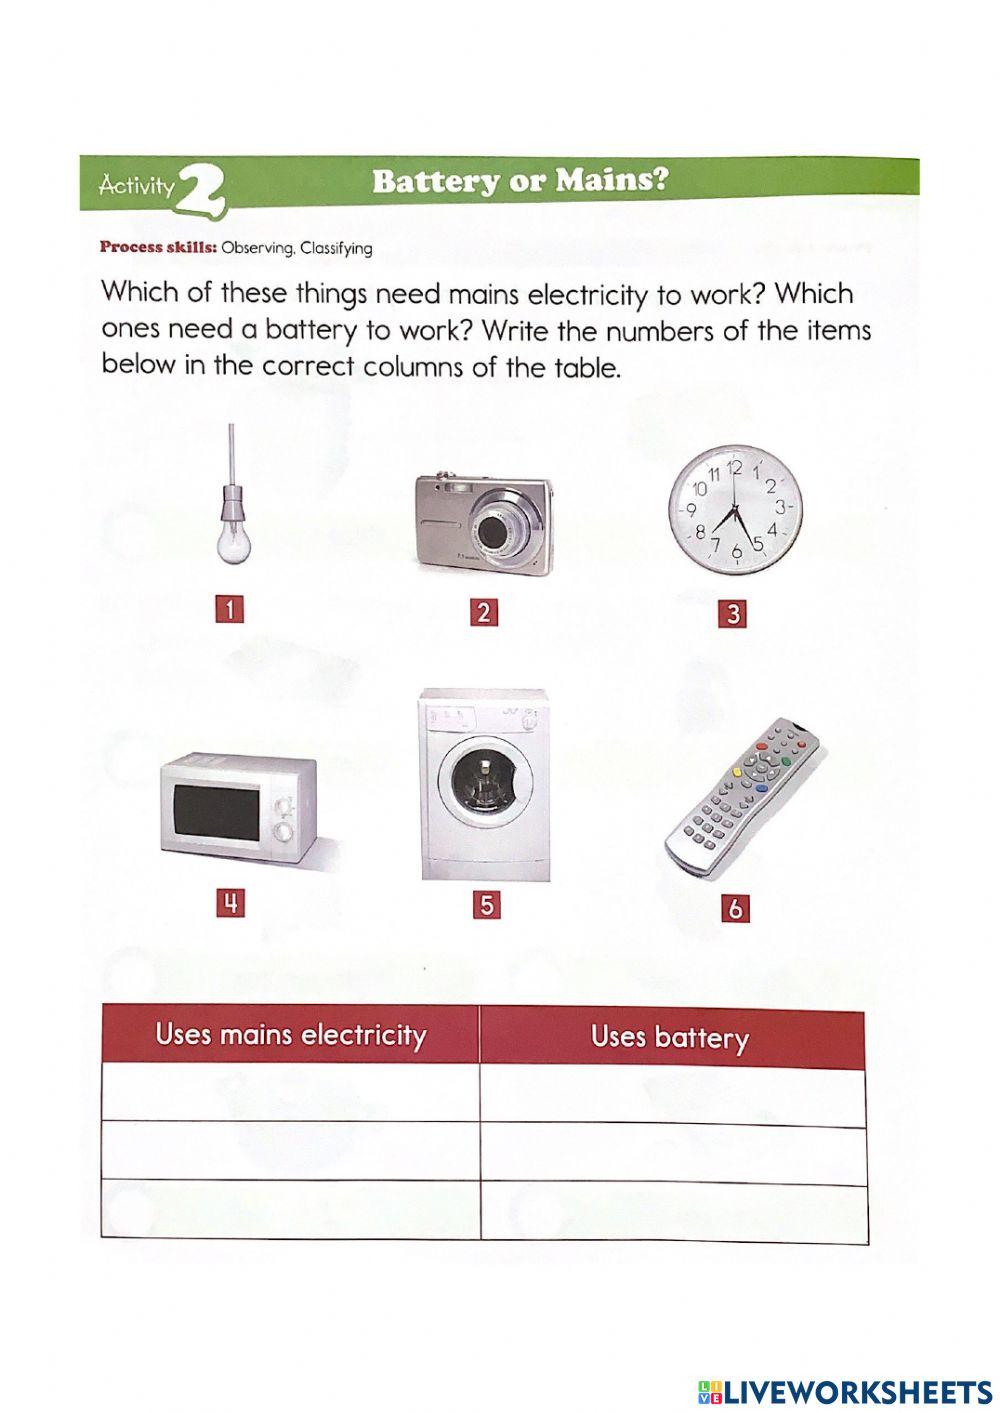 Review electrical appliances